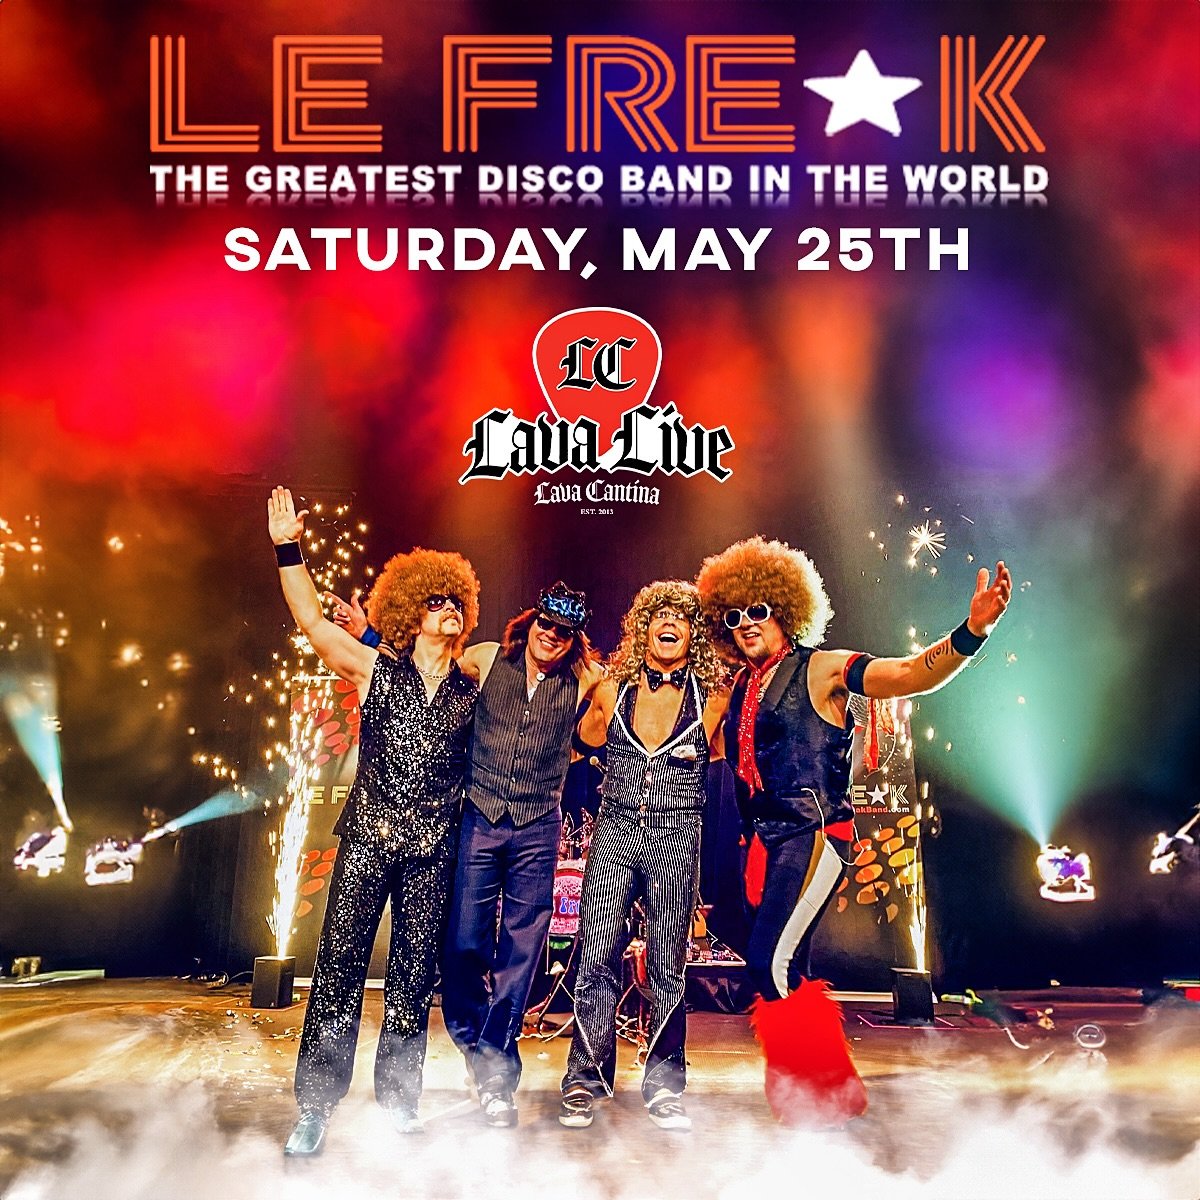 🕺🏻We&rsquo;re bringing bell-bottom pants and leisure suits to @lavacantinatc ! 🕺🏻

🔥Le Freak - The Greatest Disco Band in the World takes over on Saturday, May 25th with a DJ starting at 8:00 PM! Get ready to shake your groove thang and have fun